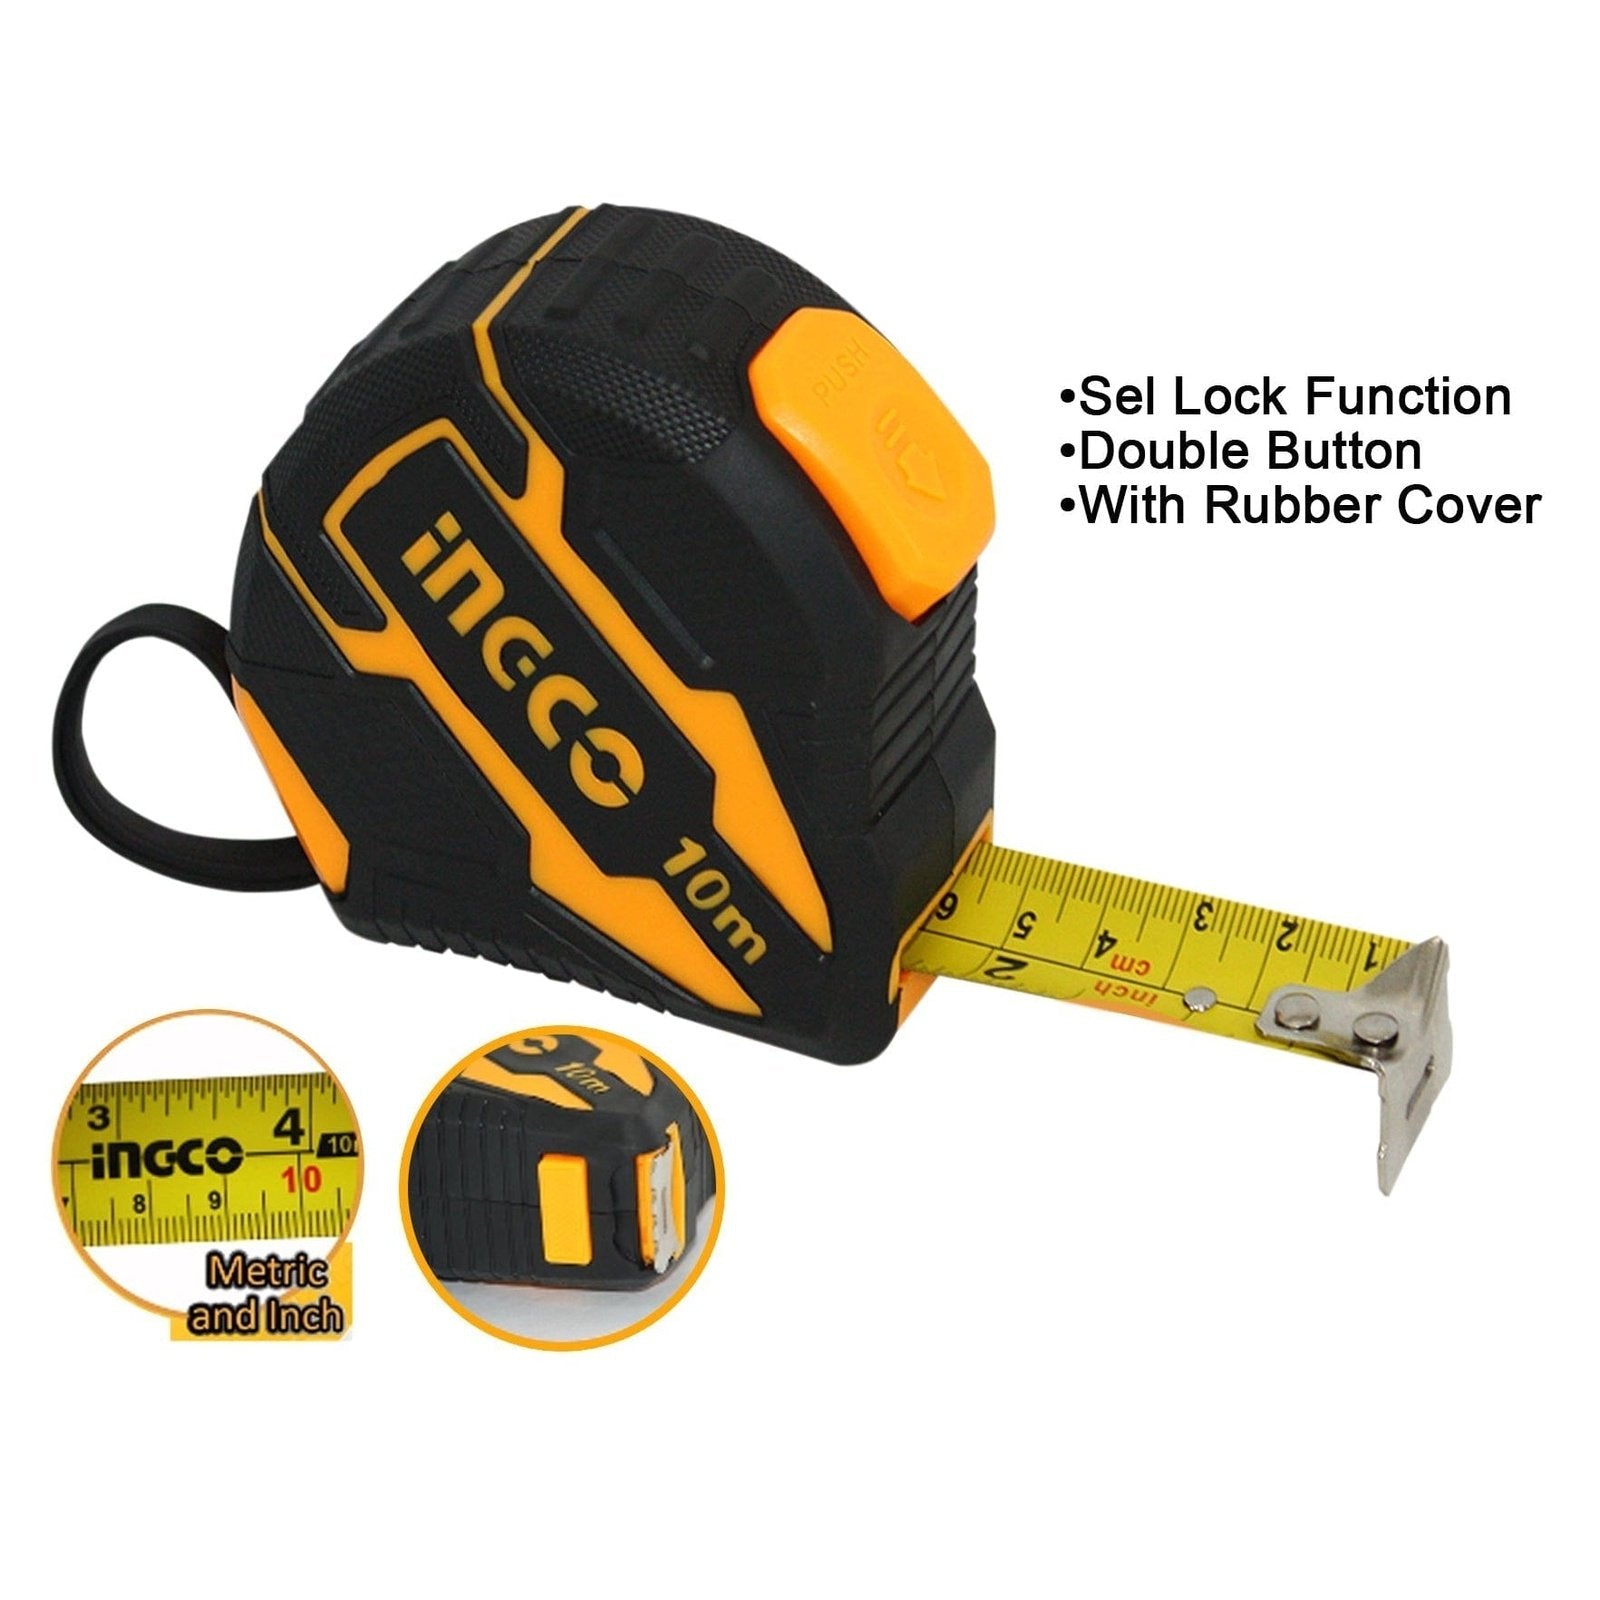 Ingco Steel Measuring Tape With Rubber Cover | Supply Master | Accra, Ghana Tape Measure Buy Tools hardware Building materials